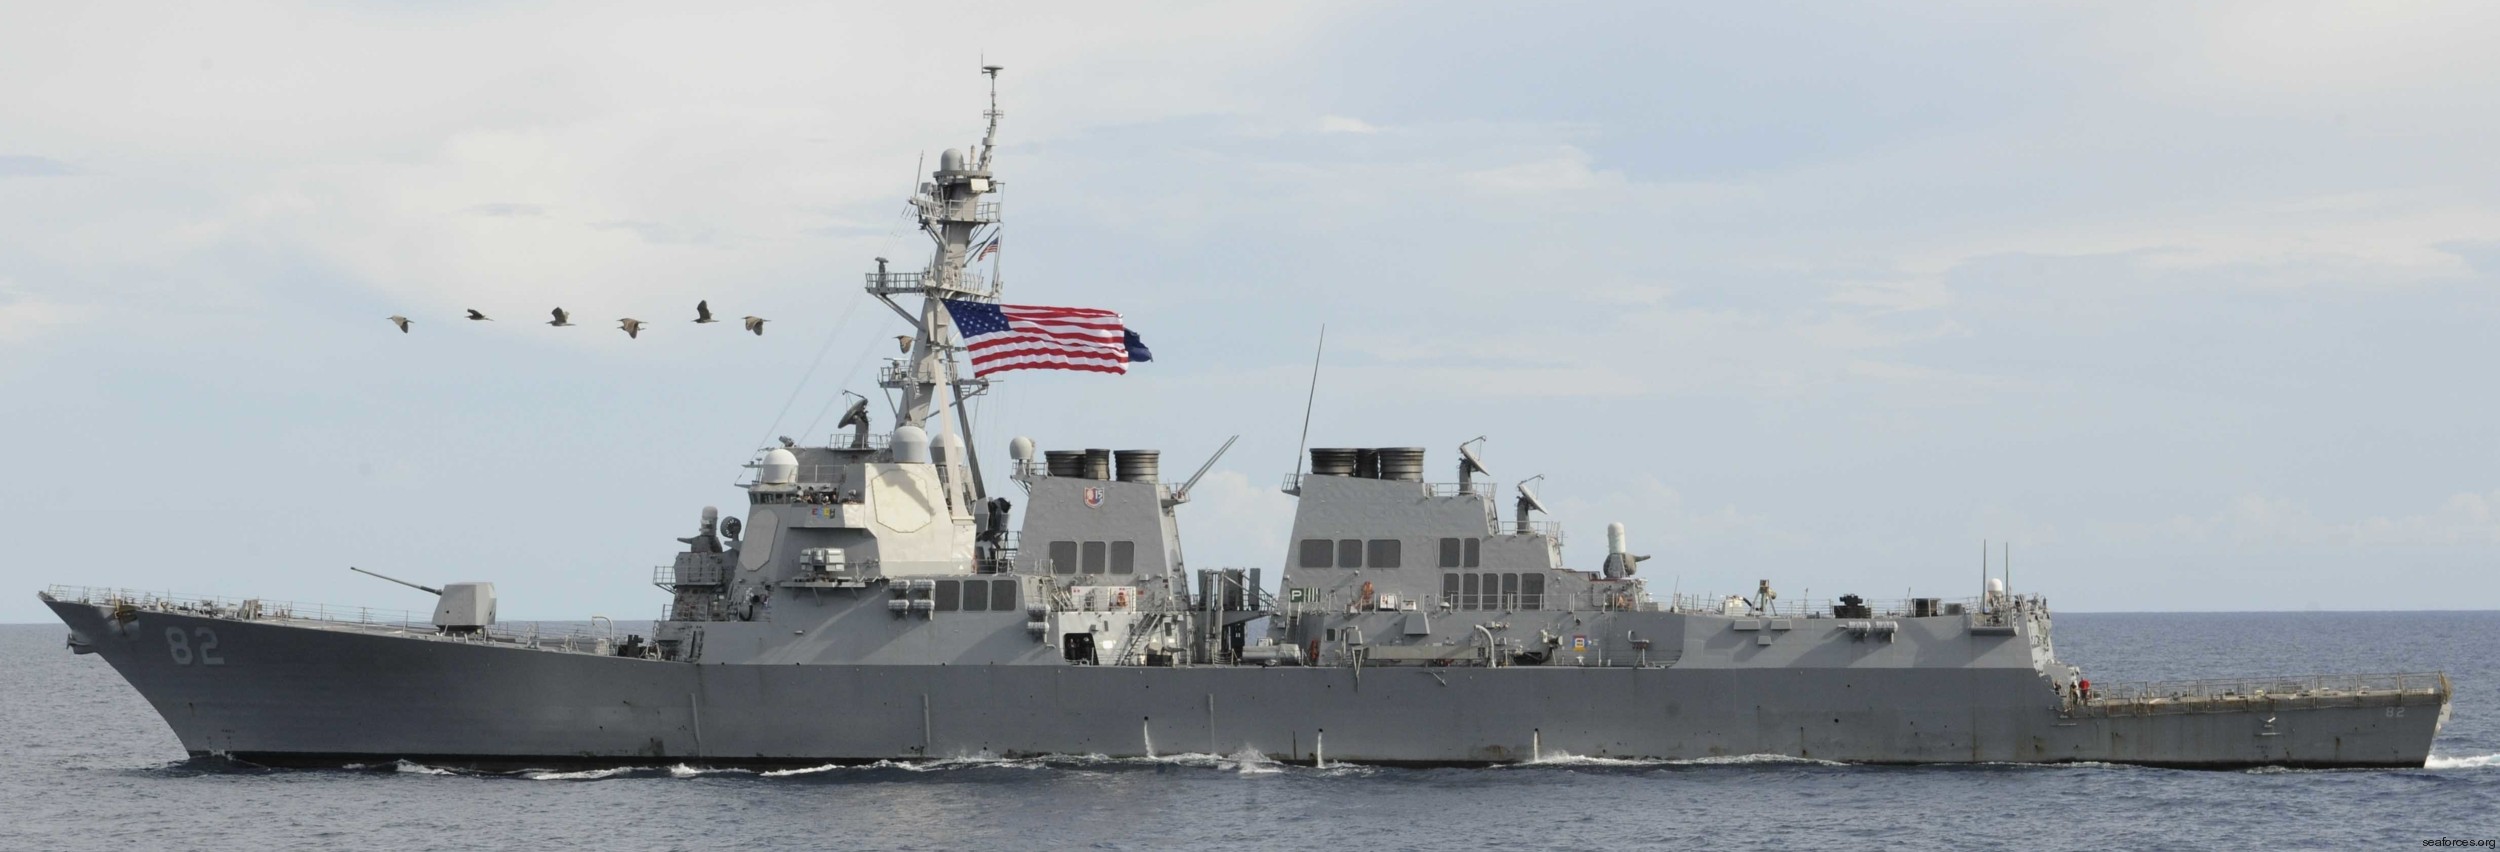 ddg-82 uss lassen arleigh burke class guided missile destroyer aegis 44 south china sea